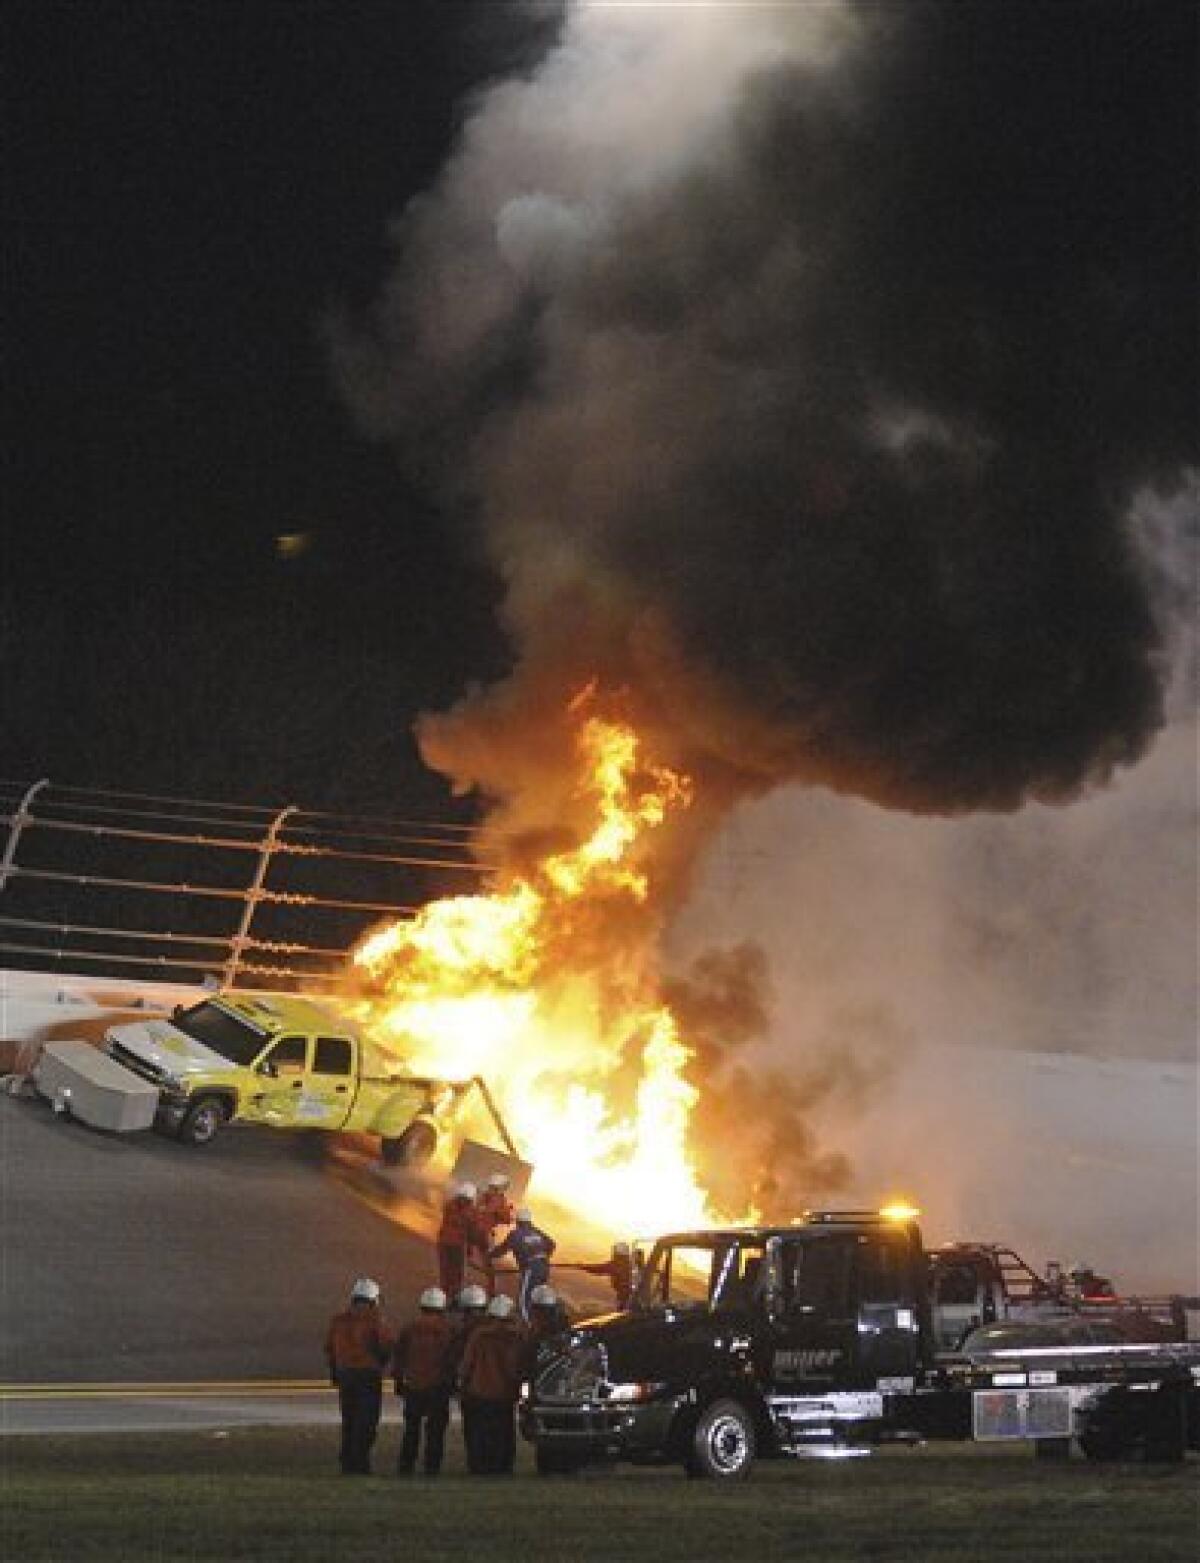 Emergency workers try to extinguish a fire on a jet dryer during the NASCAR Daytona 500 auto race at Daytona International Speedway in Daytona Beach, Fla., Monday, Feb. 27, 2012. Juan Pablo Montoya's car struck the dryer during a caution period after something on his car broke. (AP Photo/Rob Sweeten)